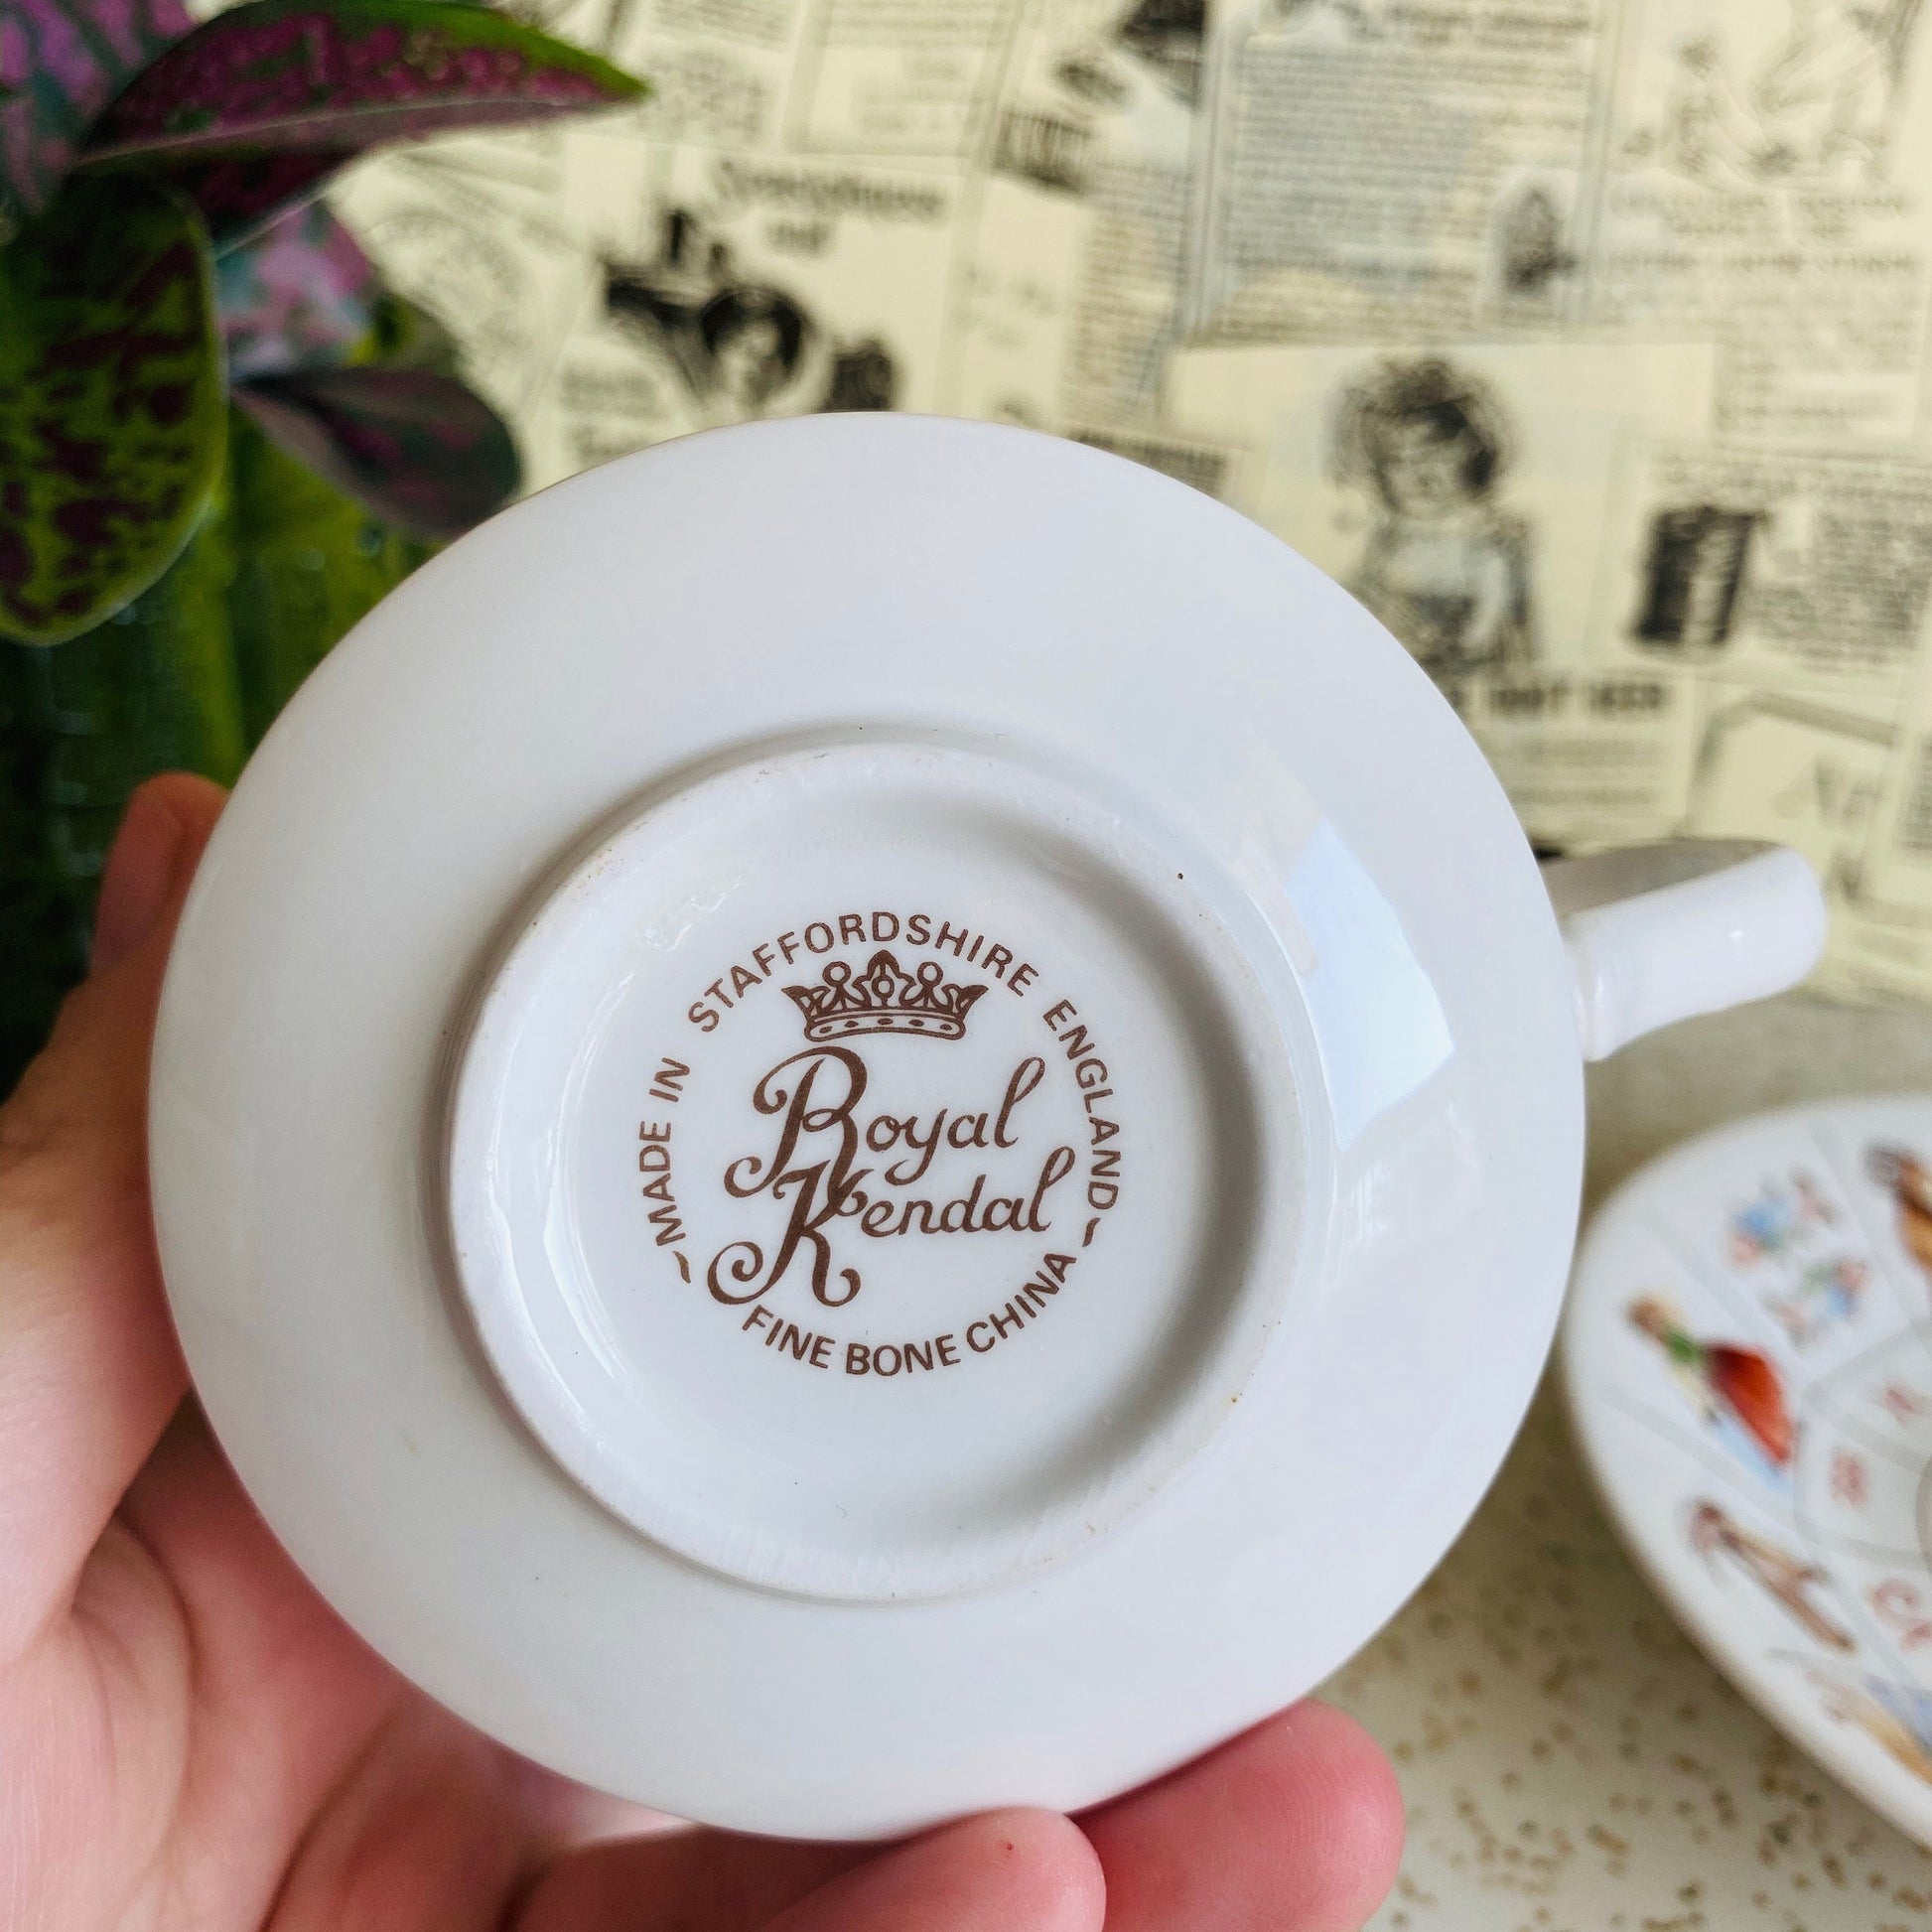 Vintage Royal Kendal fortune telling teacup. Colorful tea cup and saucer set for tea leaf reading with astrology and zodiac symbols design.